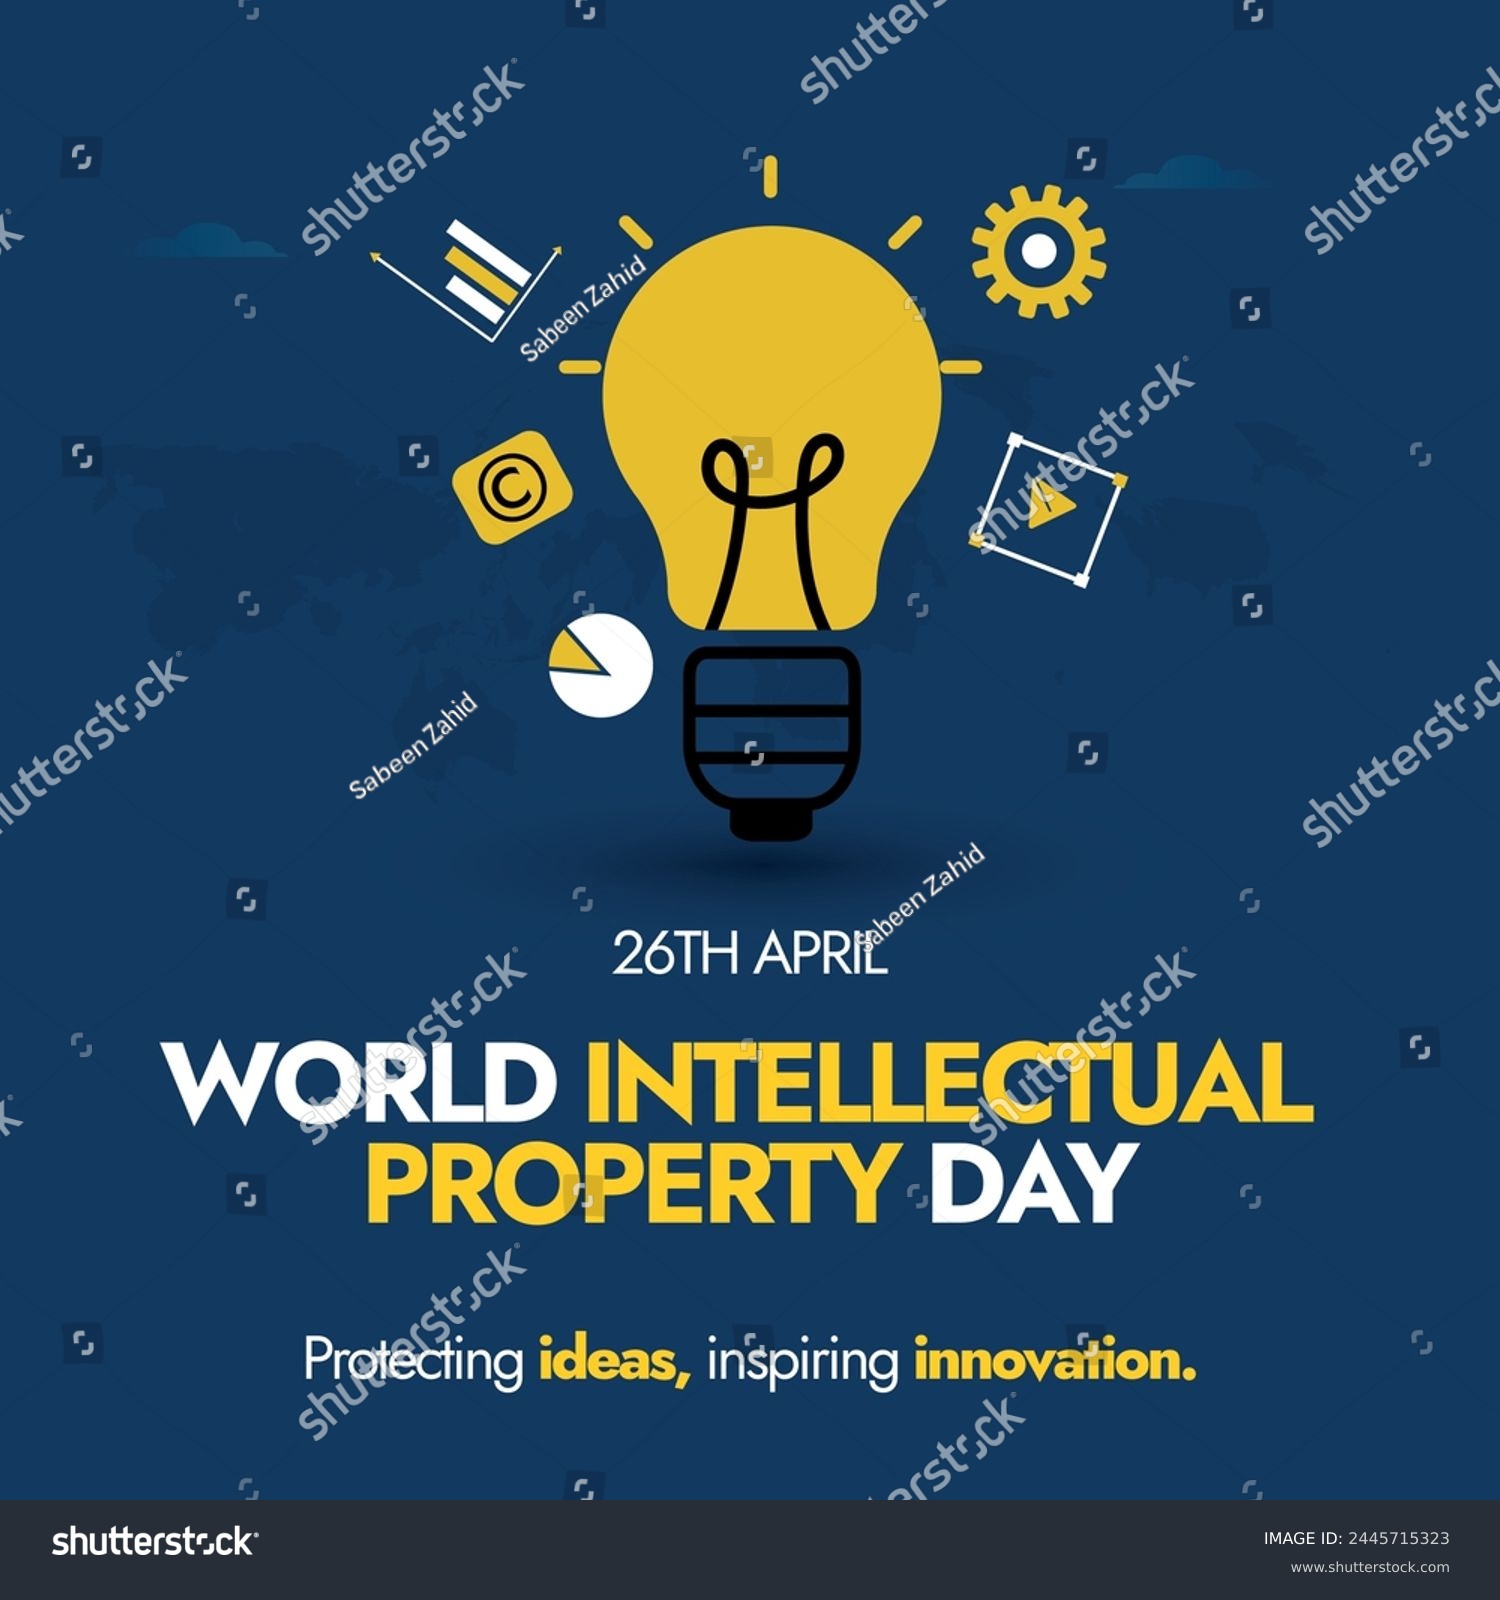 World Intellectual Property day.26th April World Intellectual property day awareness banner with light bulb and icons of gear, charts.Banner to promote the Building our common future with innovation. #2445715323